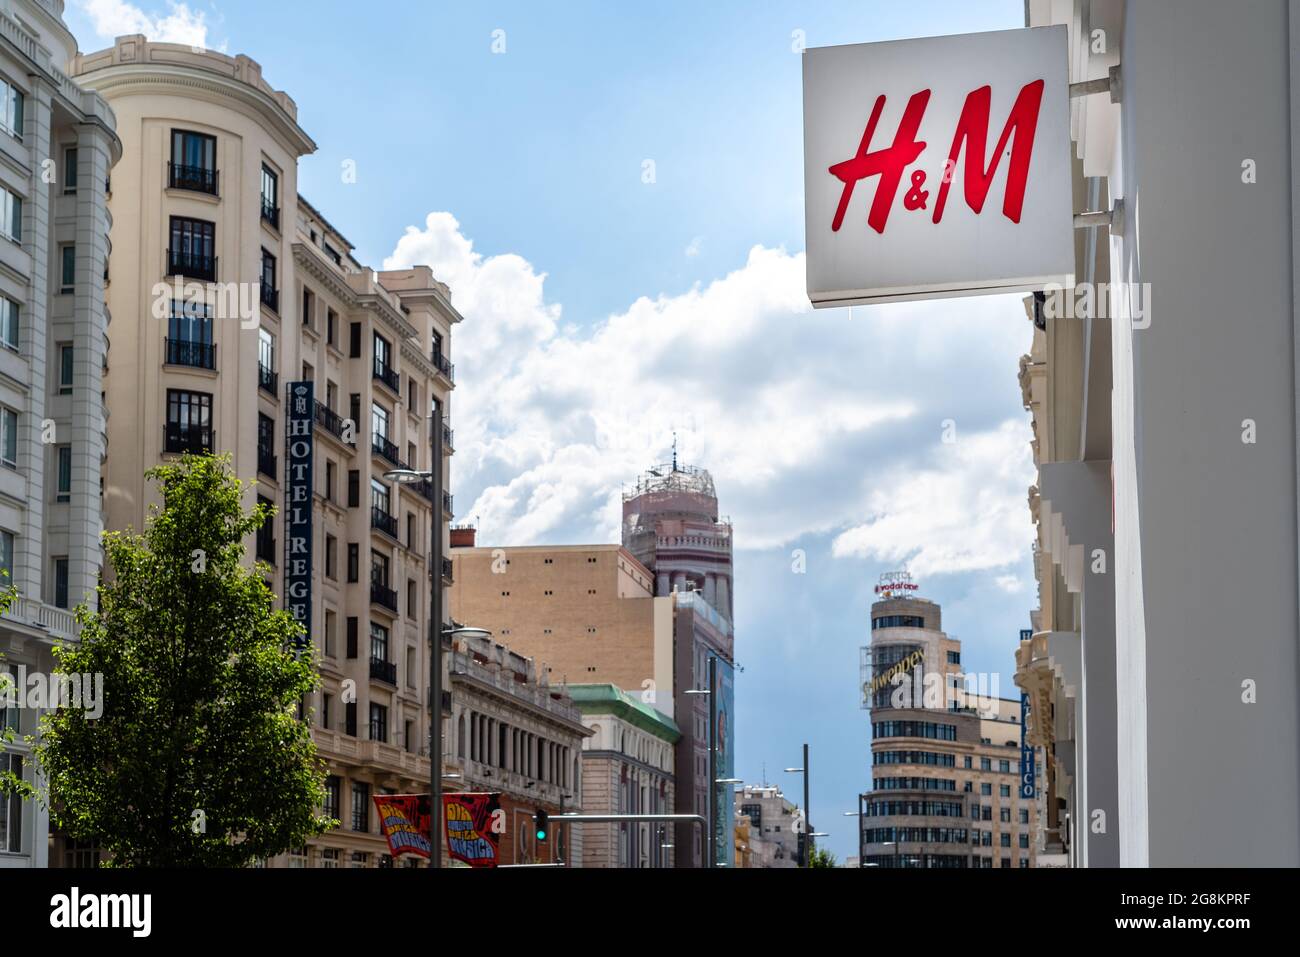 Madrid, Spain - June 18, 2021: H&M fashion store sign in Gran Via against  cityscape. The iconic avenue of Madrid famous for his cinemas and stores  Stock Photo - Alamy